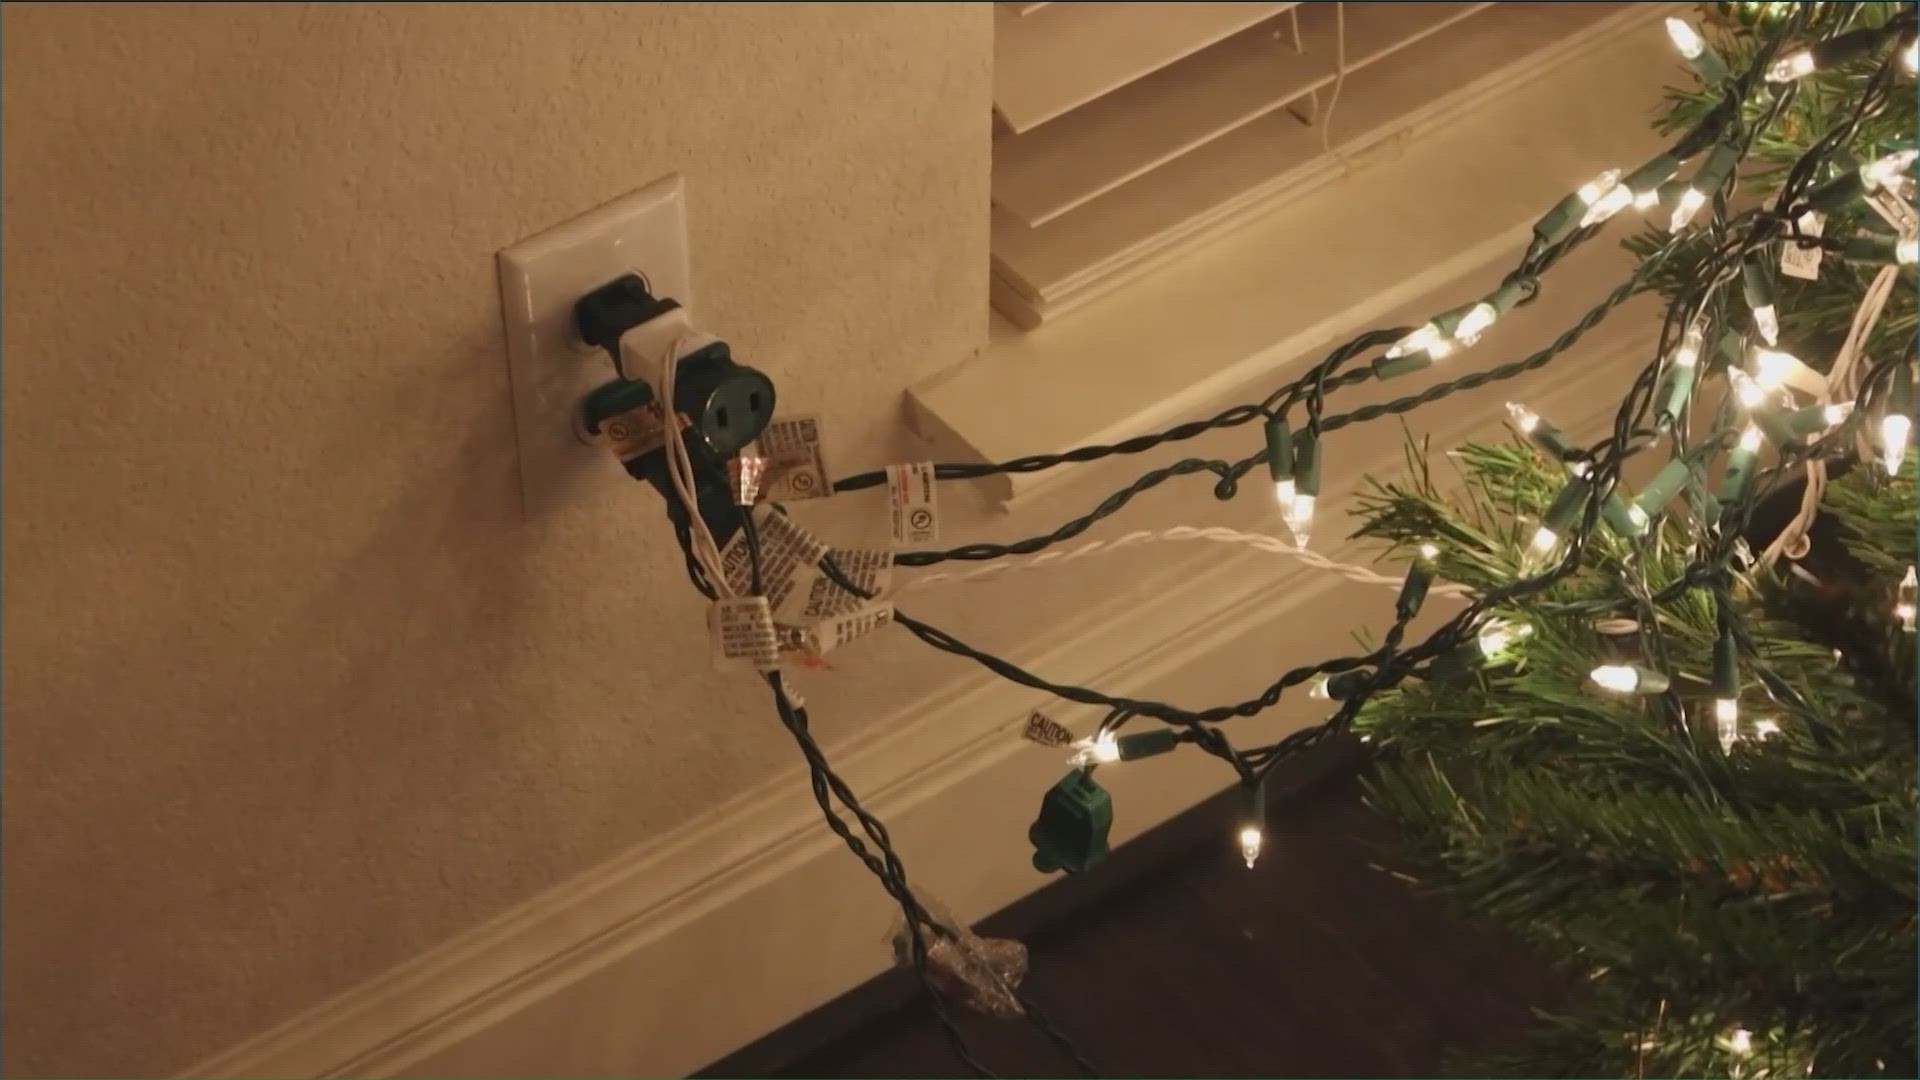 Putting up the Christmas tree in your home can be a special holiday tradition, but it can turn south quickly. Here are tips to stay safe.